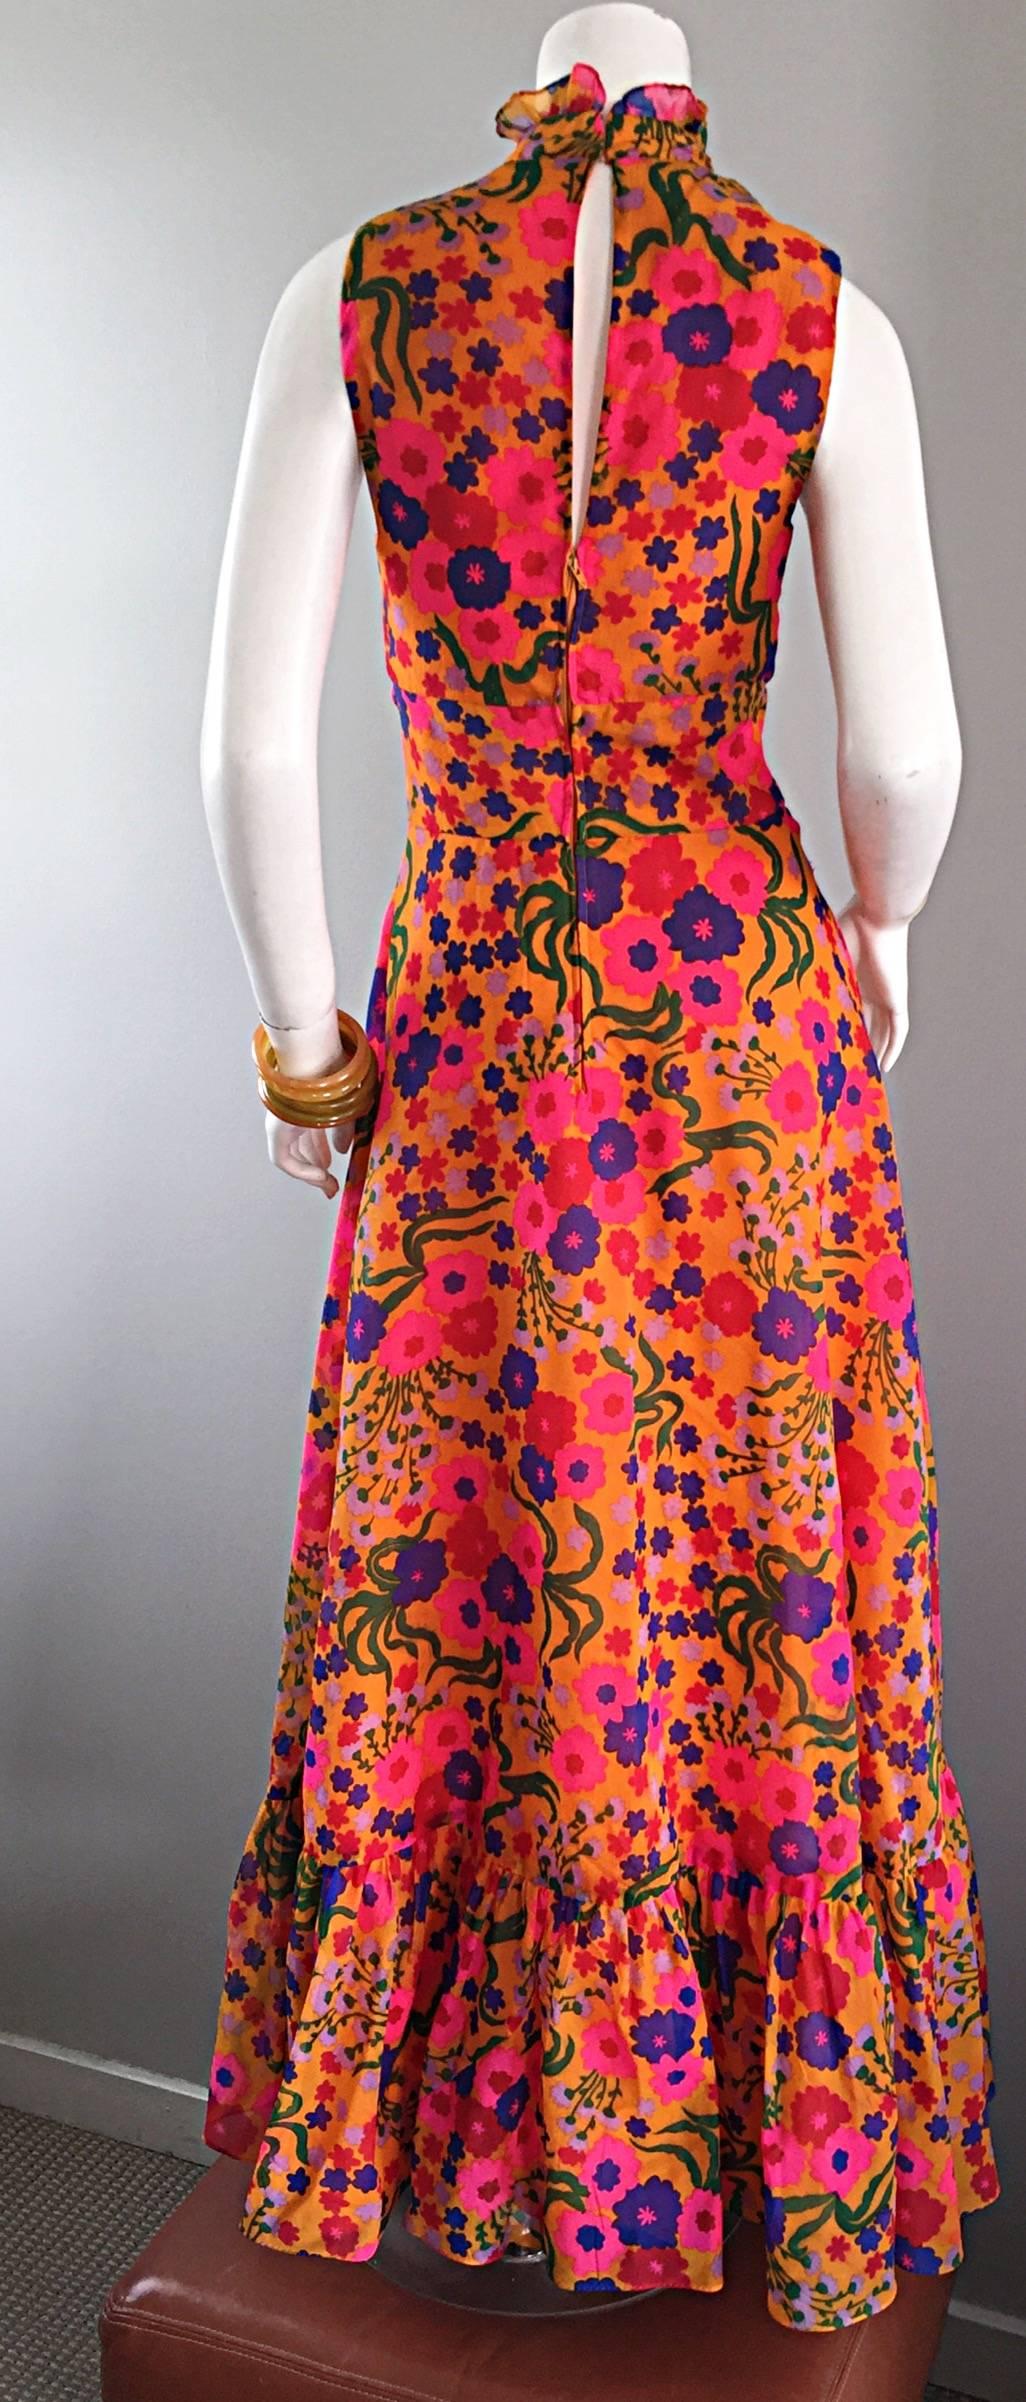 Amazing 1970s 70s Colorful Psychedelic Chiffon Floral Ruffle Vintage Maxi Dress 2